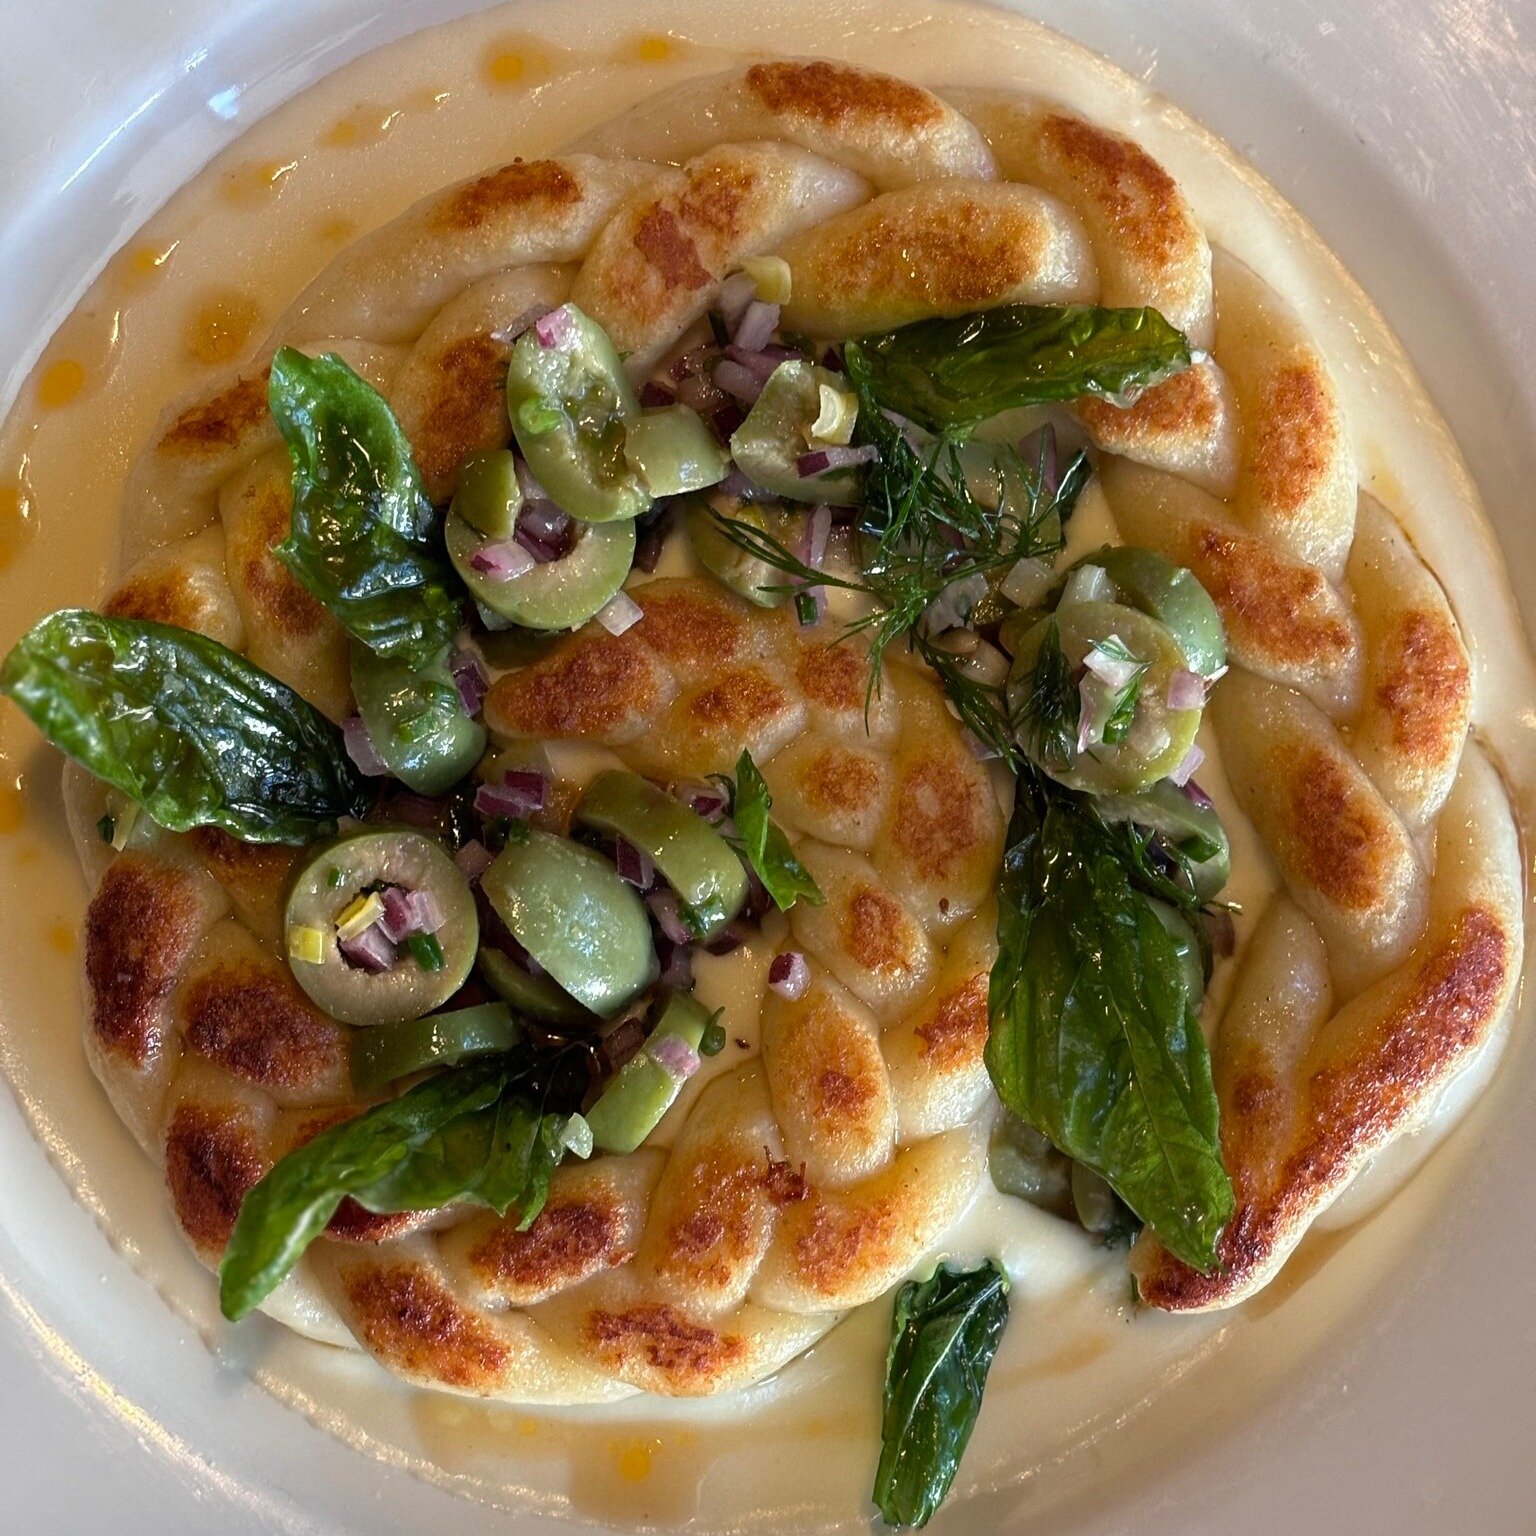 Thanks for everyone's great guesses! Meet Ella's latest creation...

gnocchi braid in a pool of ch&egrave;vre fondue, castelvetrano olive salad, crispy fried basil leaves and Calabrian chili oil $26